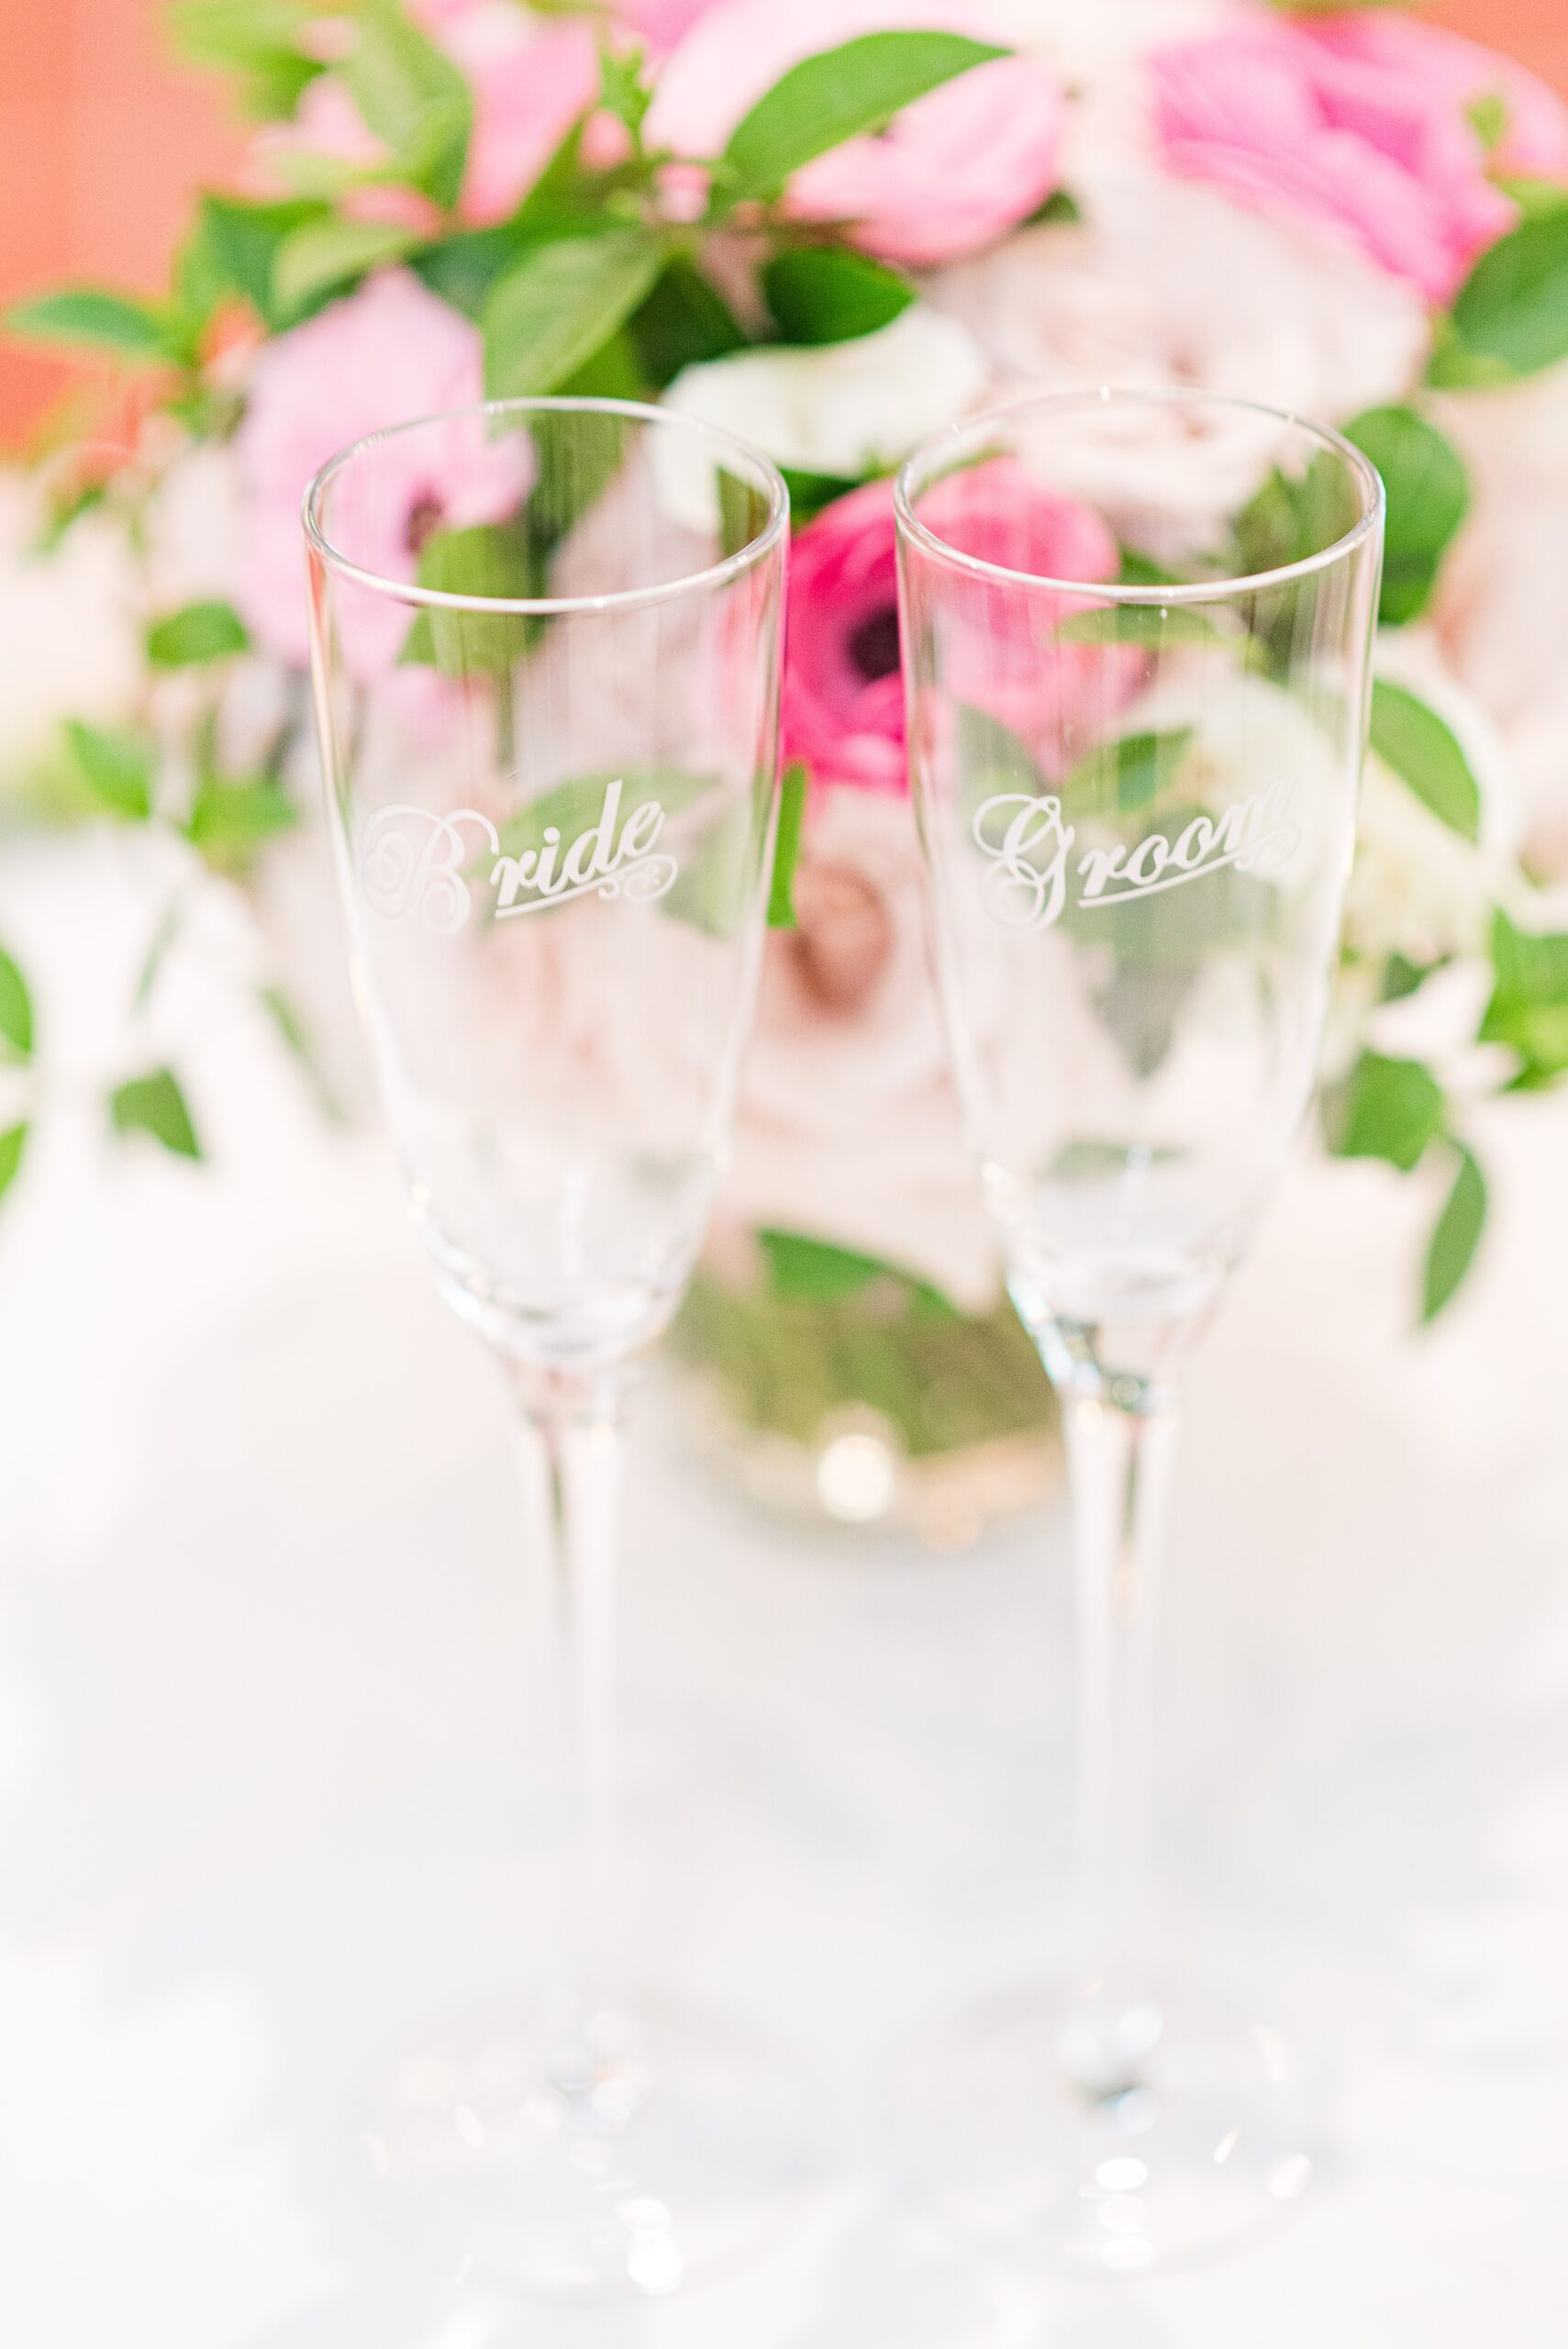 Details of bride and groom glasses on a table